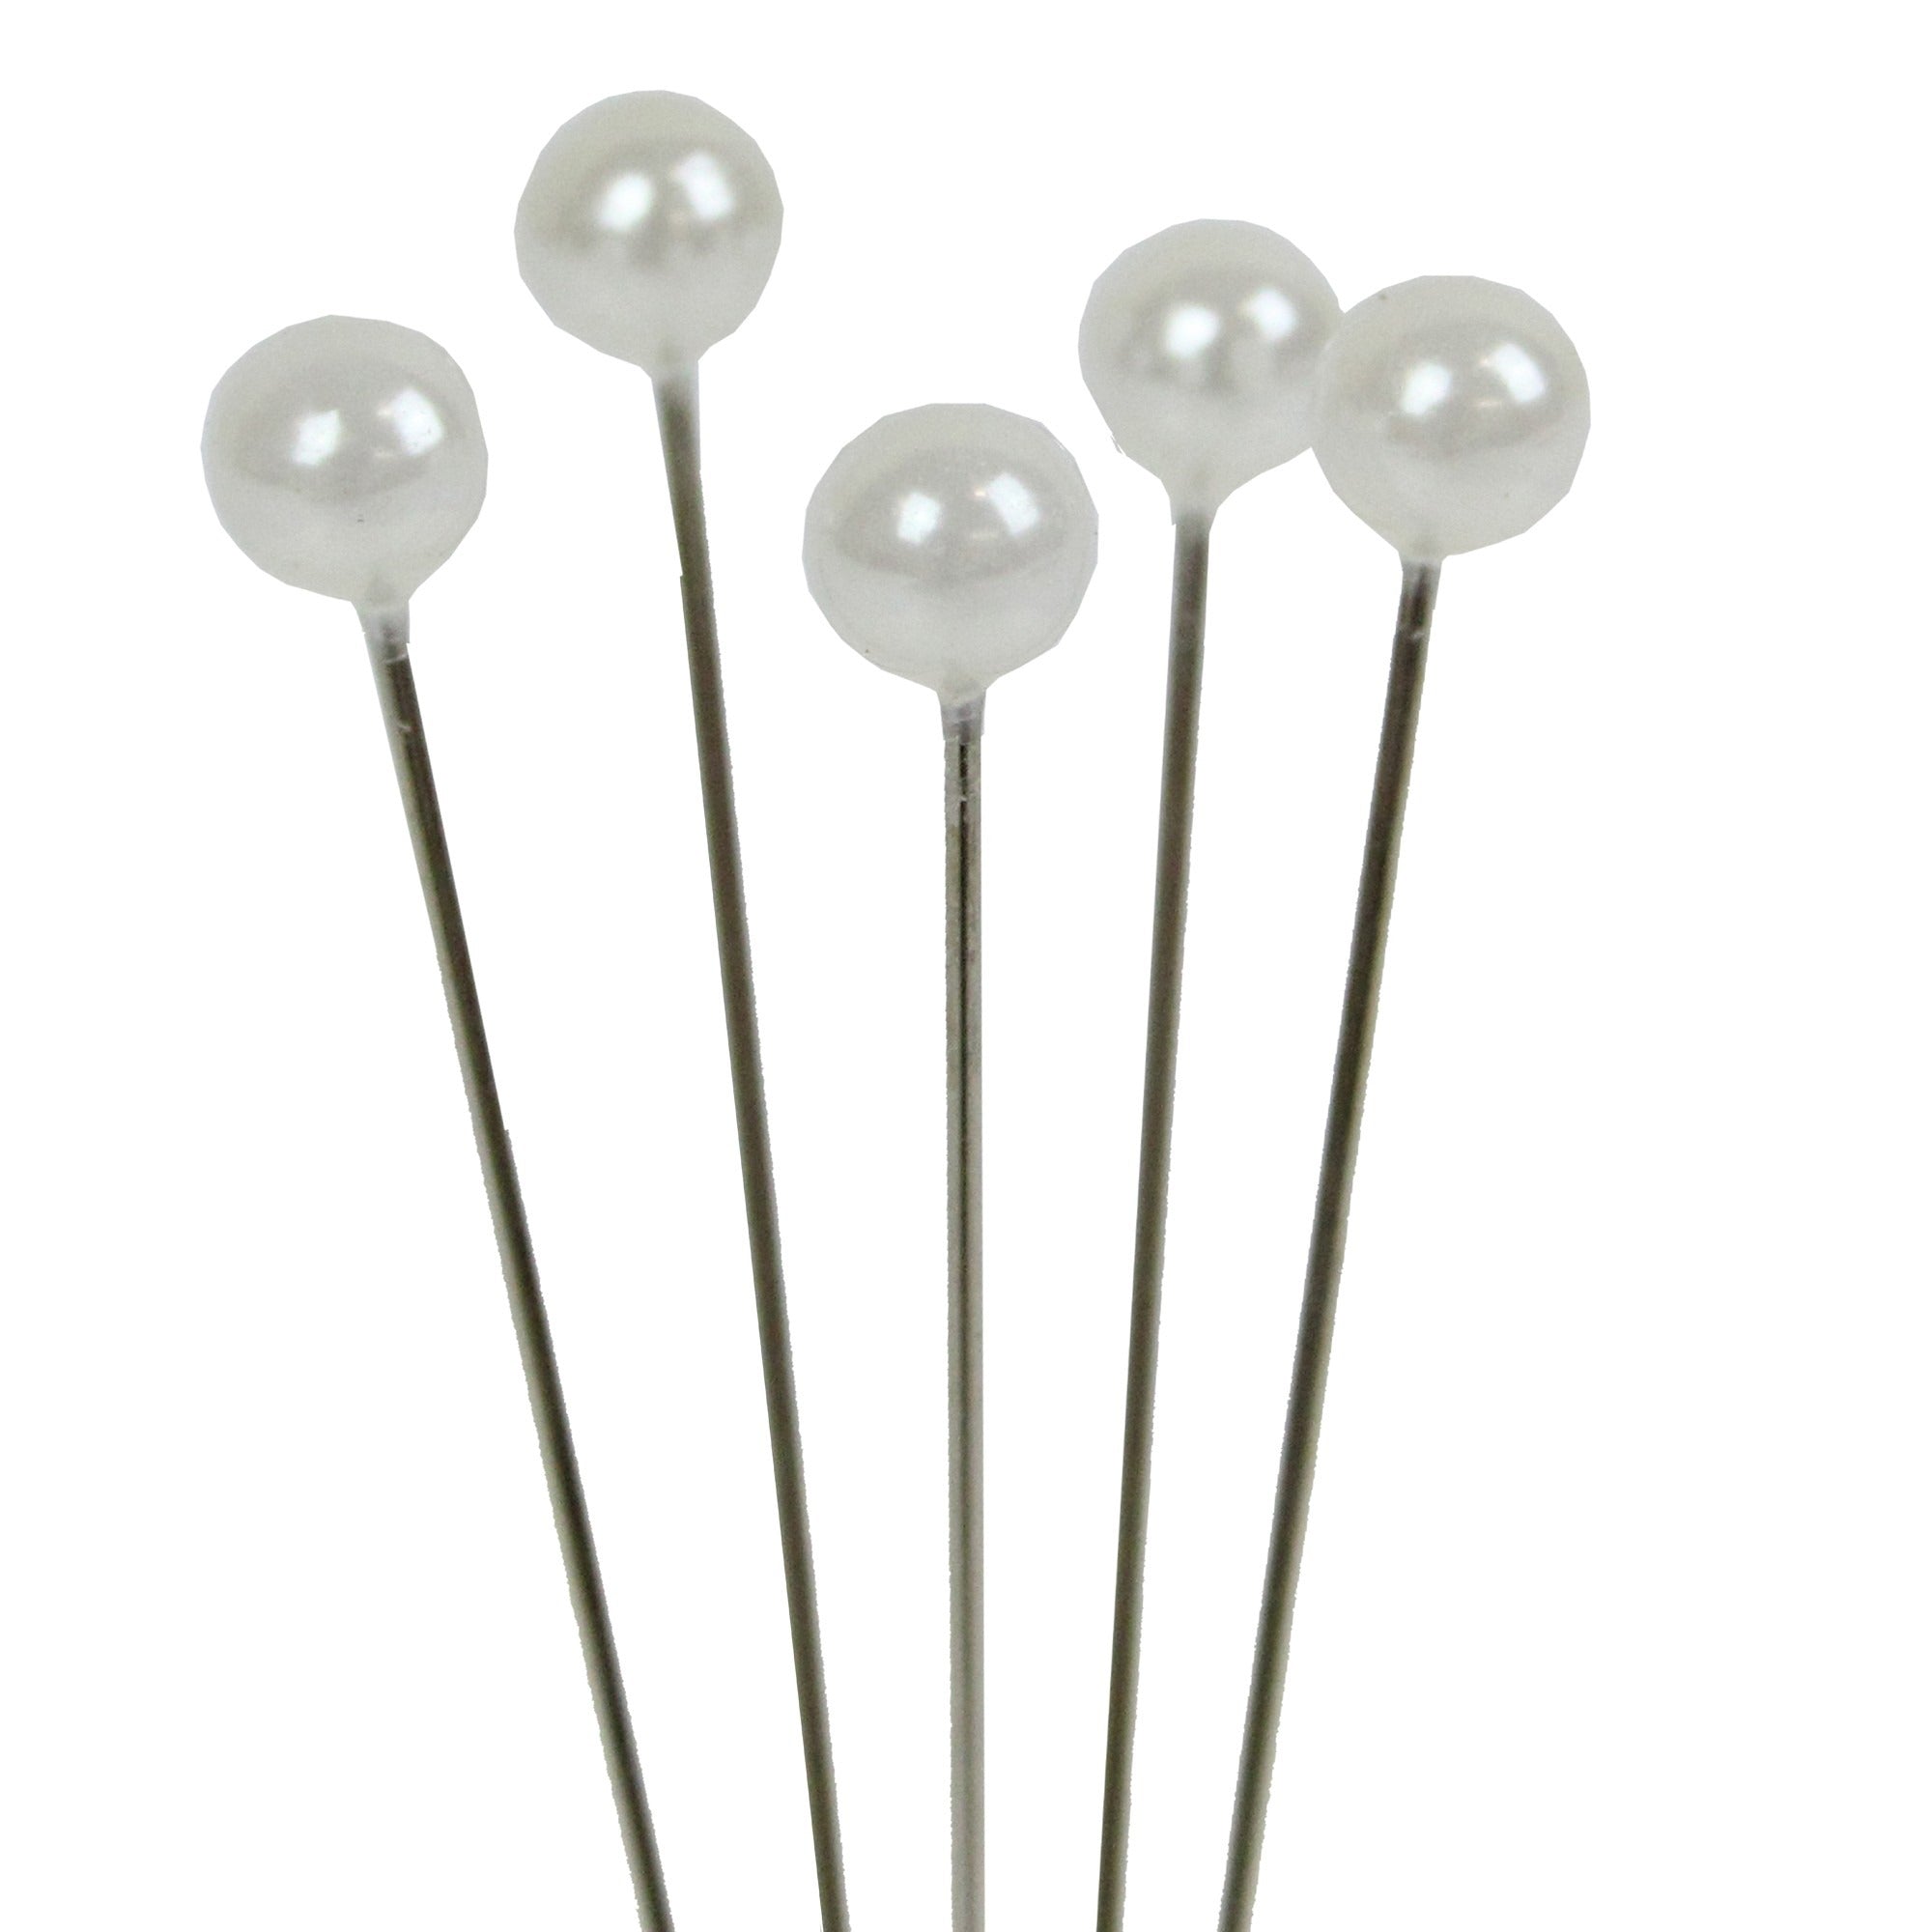 View White 7cm Pearl Headed Pins information